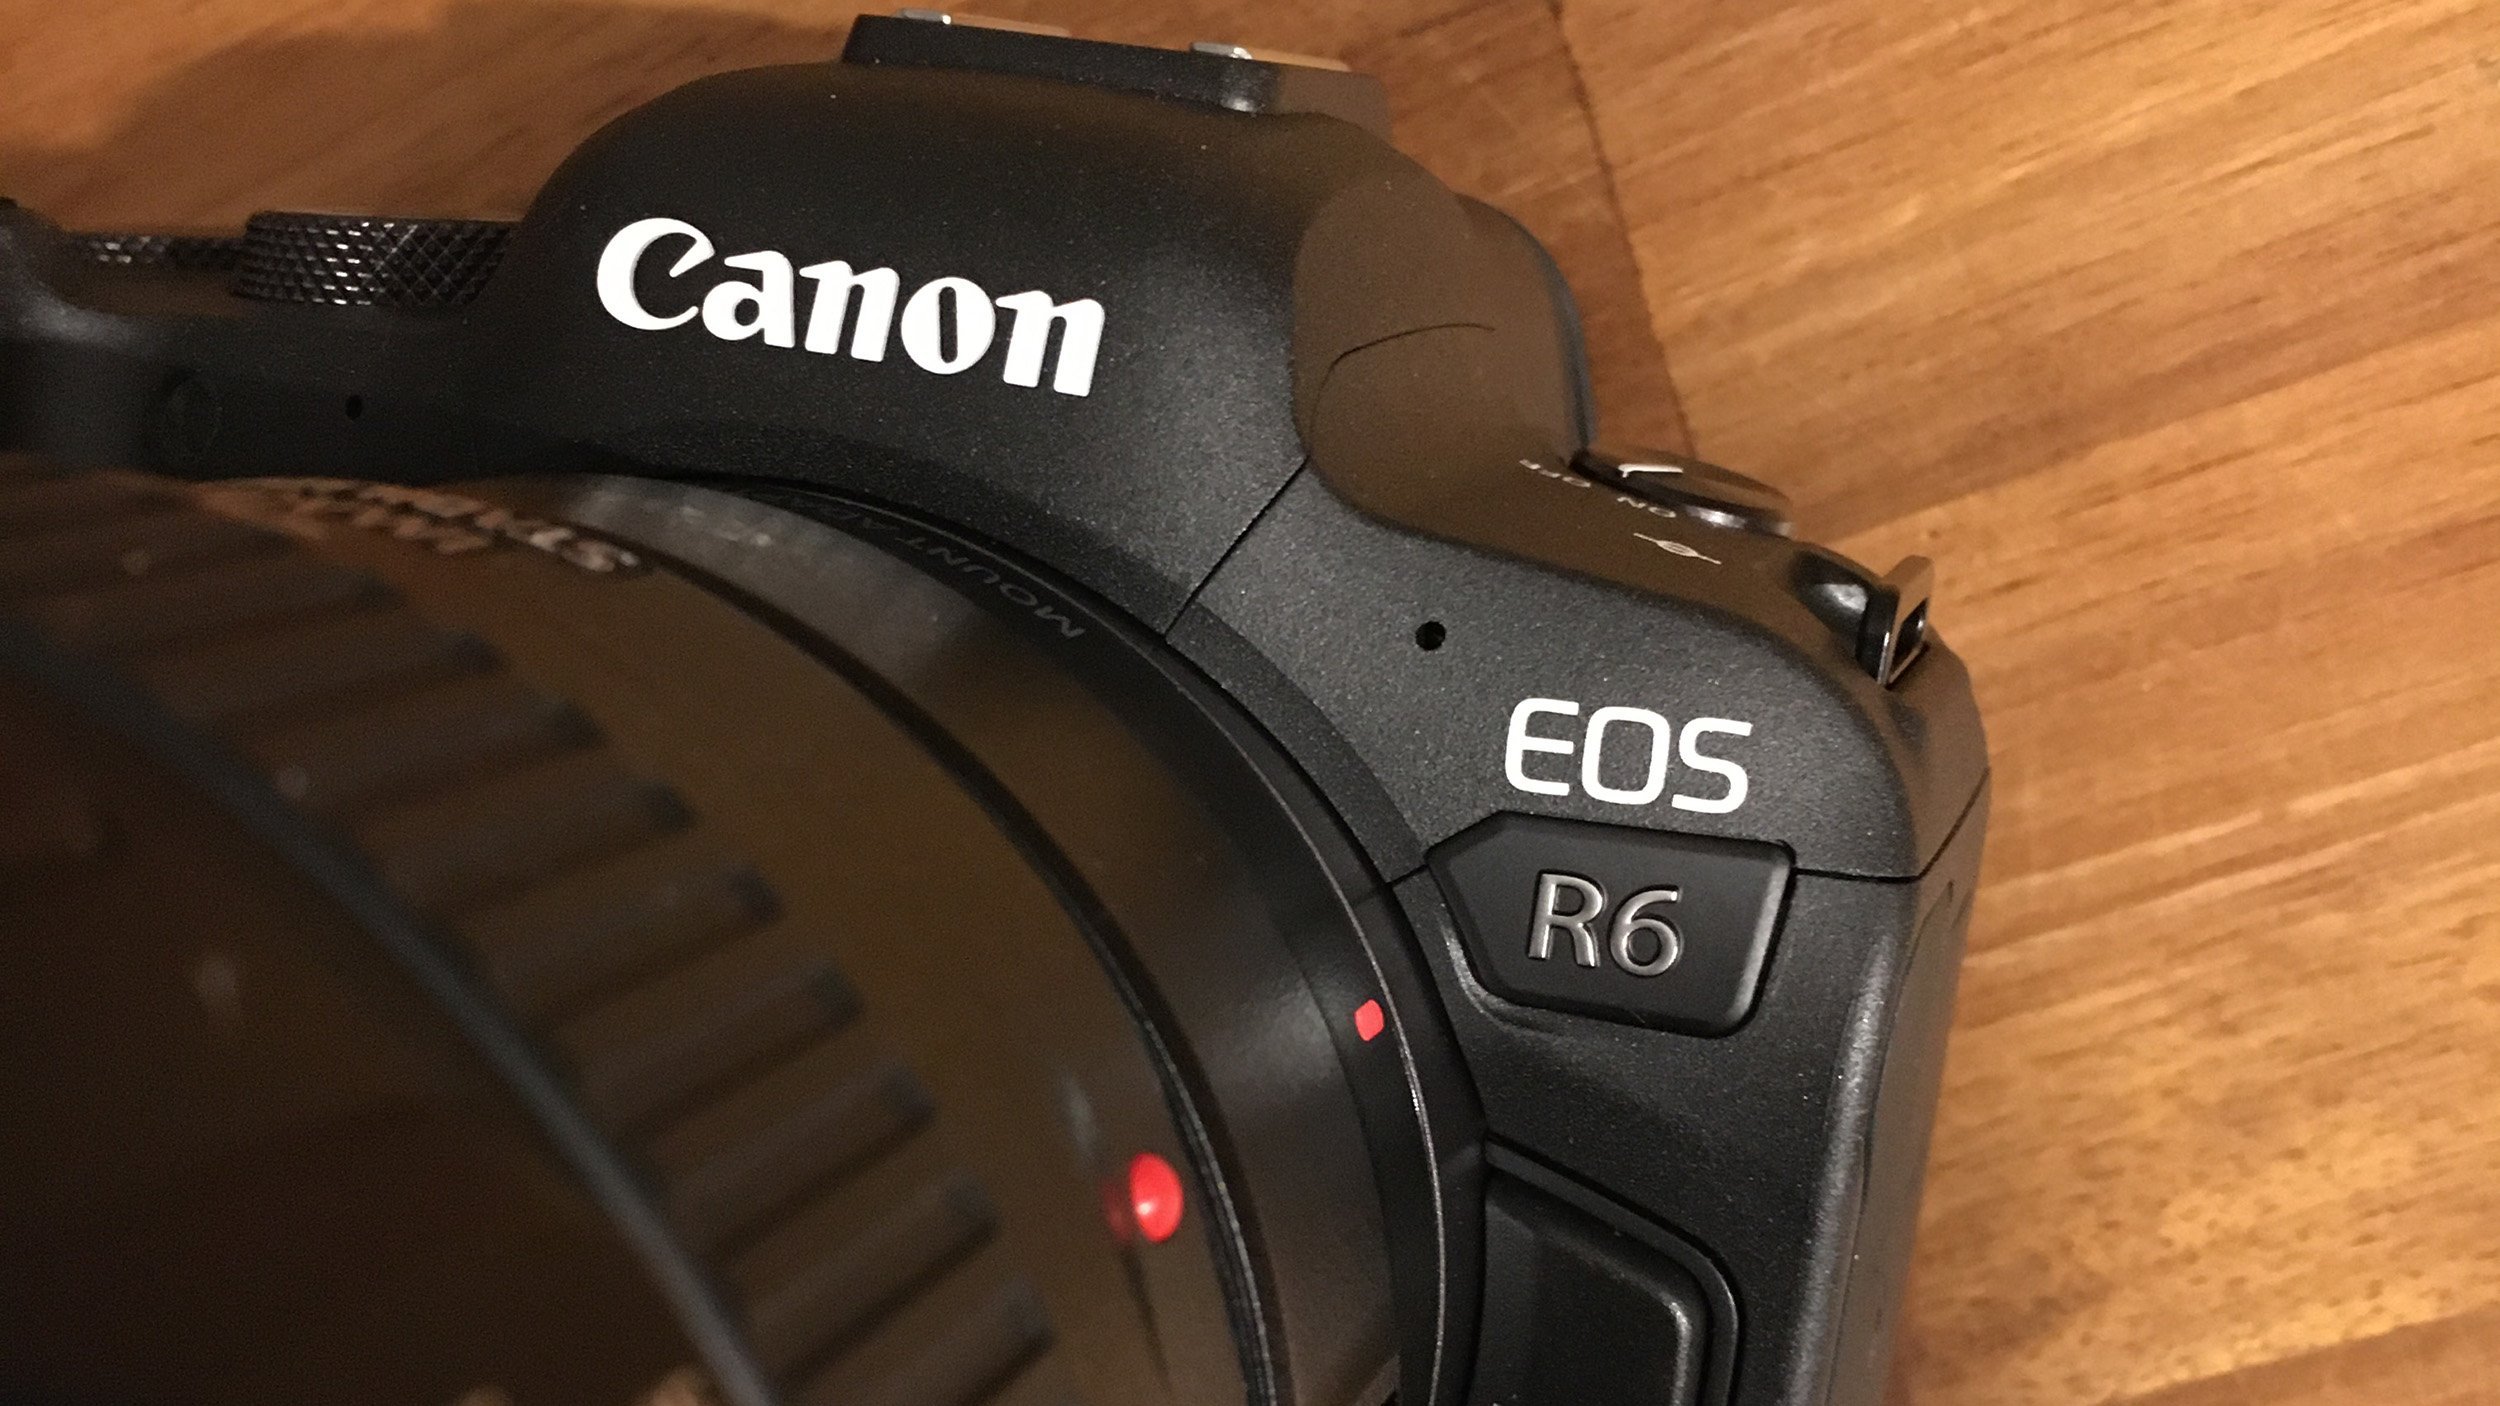 Canon EOS R6, an exceptional mirrorless camera for wildlife photography